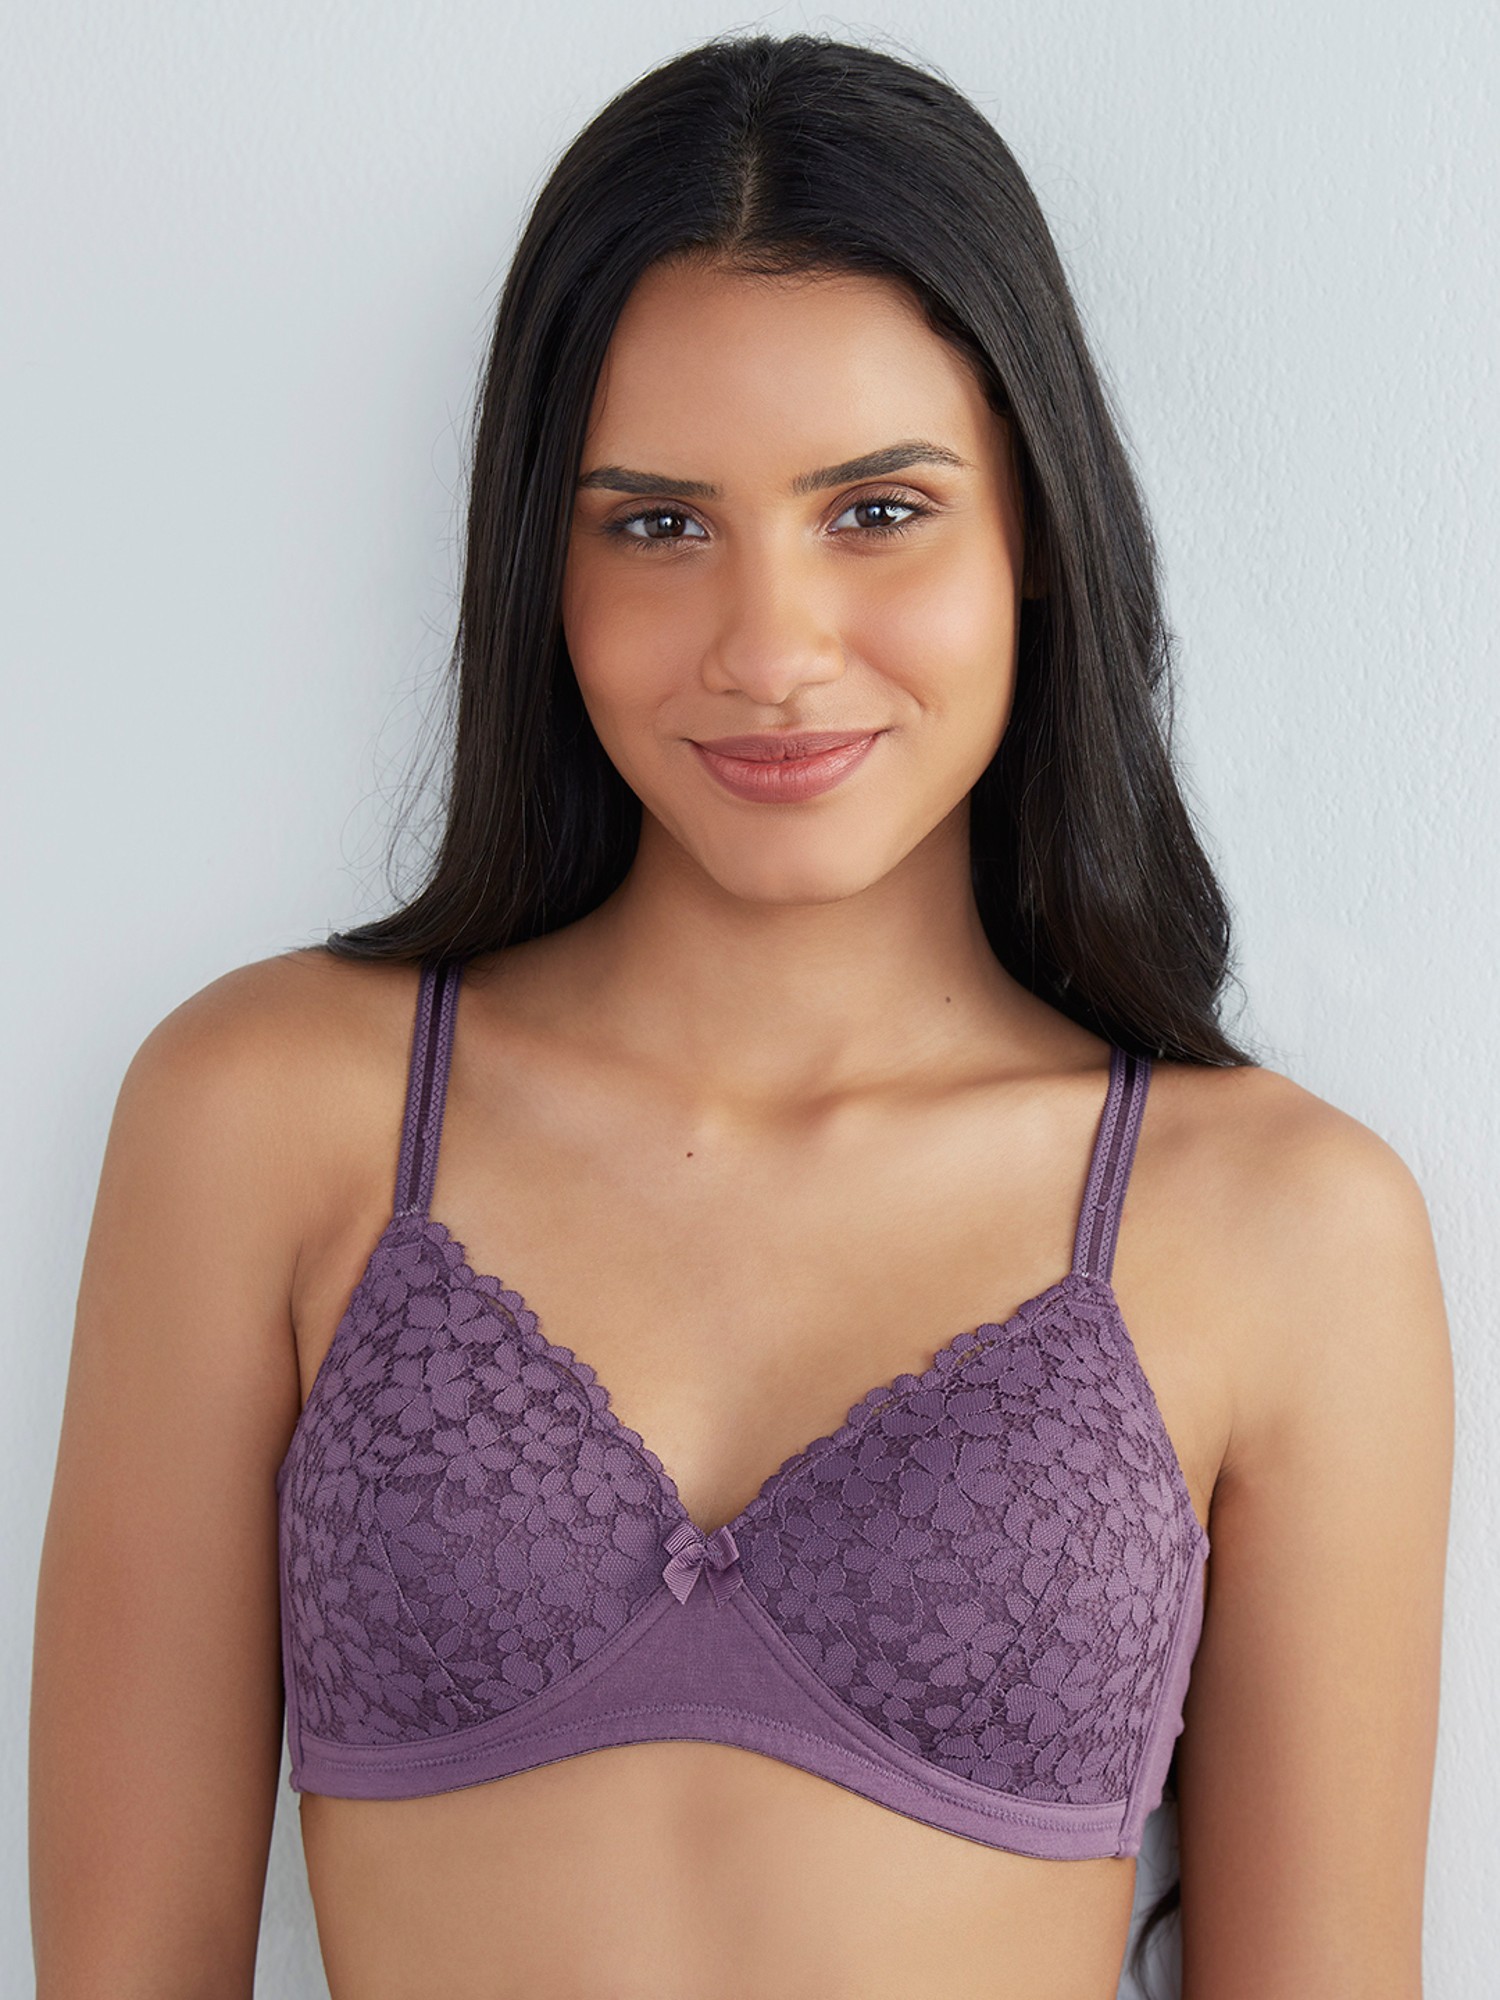 Petite's Get a Boost ~ The Little Bra Company's Push-up Bras